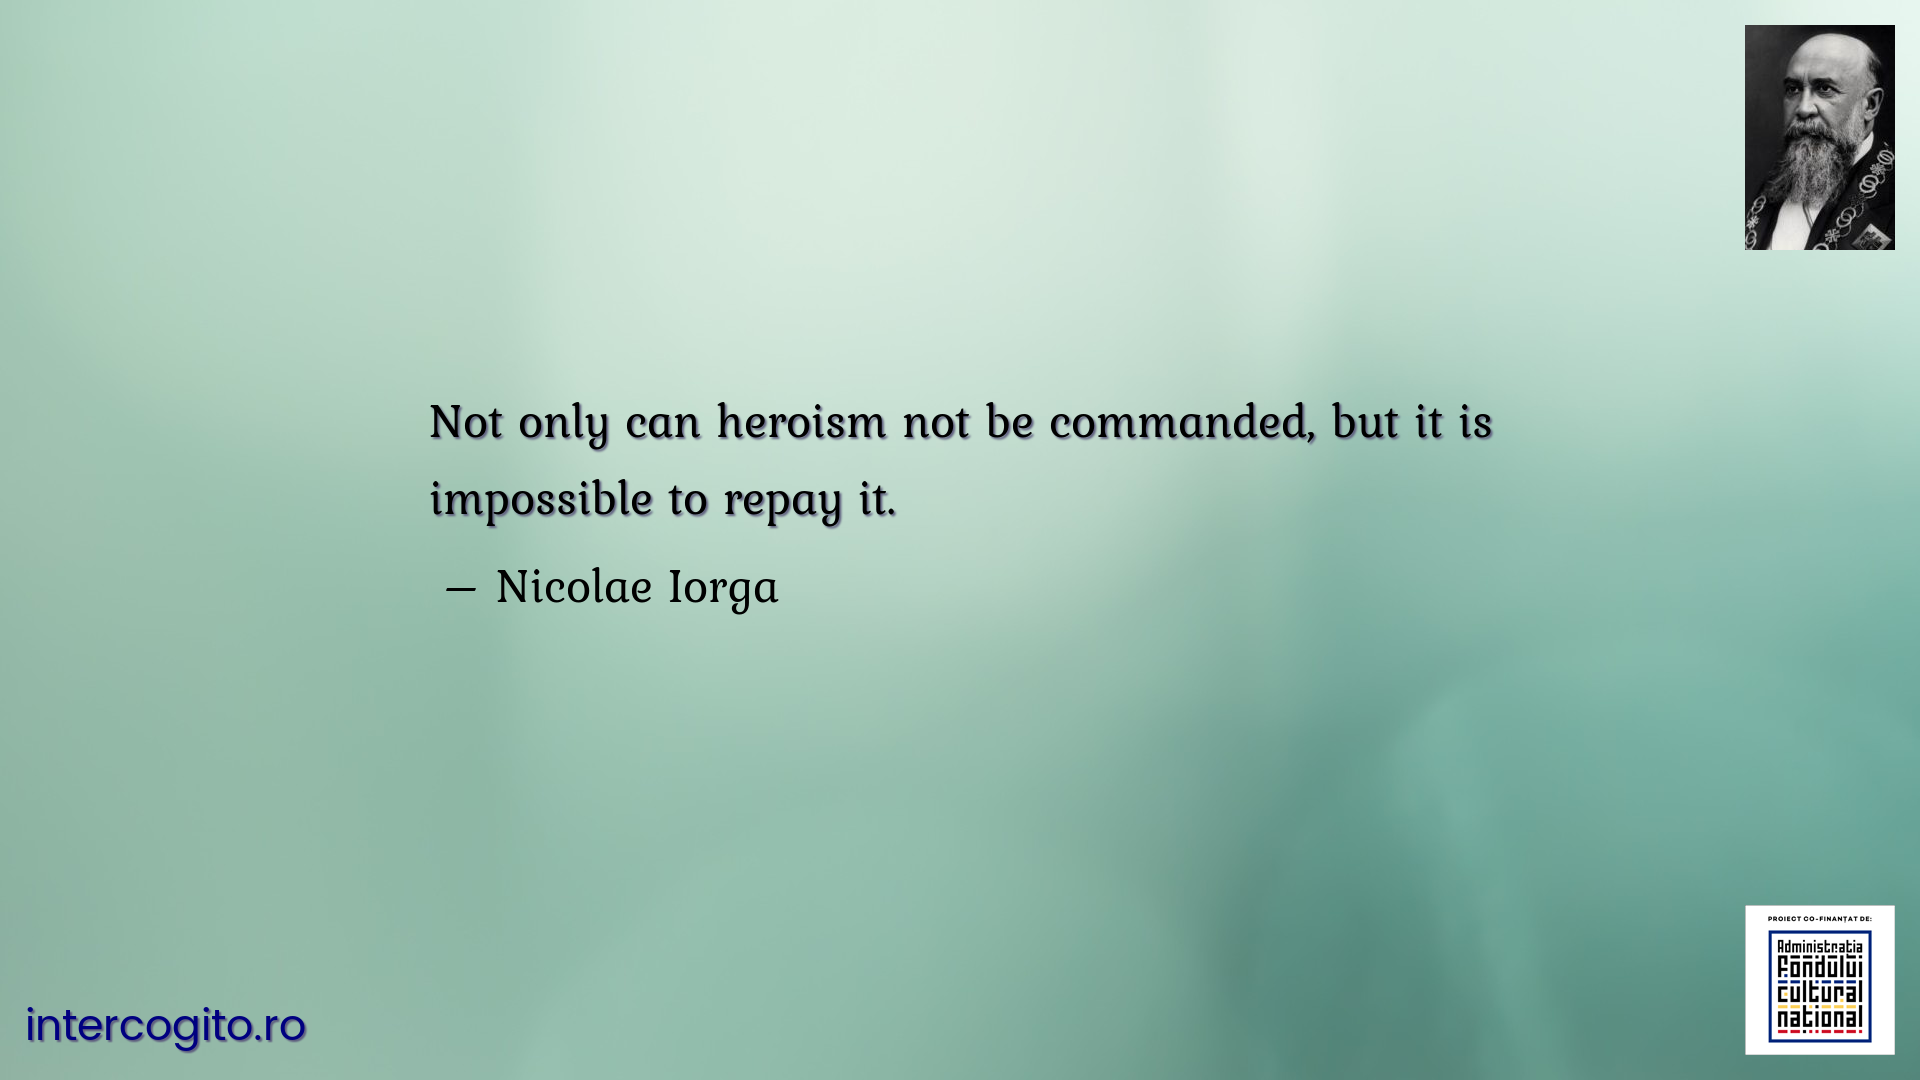 Not only can heroism not be commanded, but it is impossible to repay it.